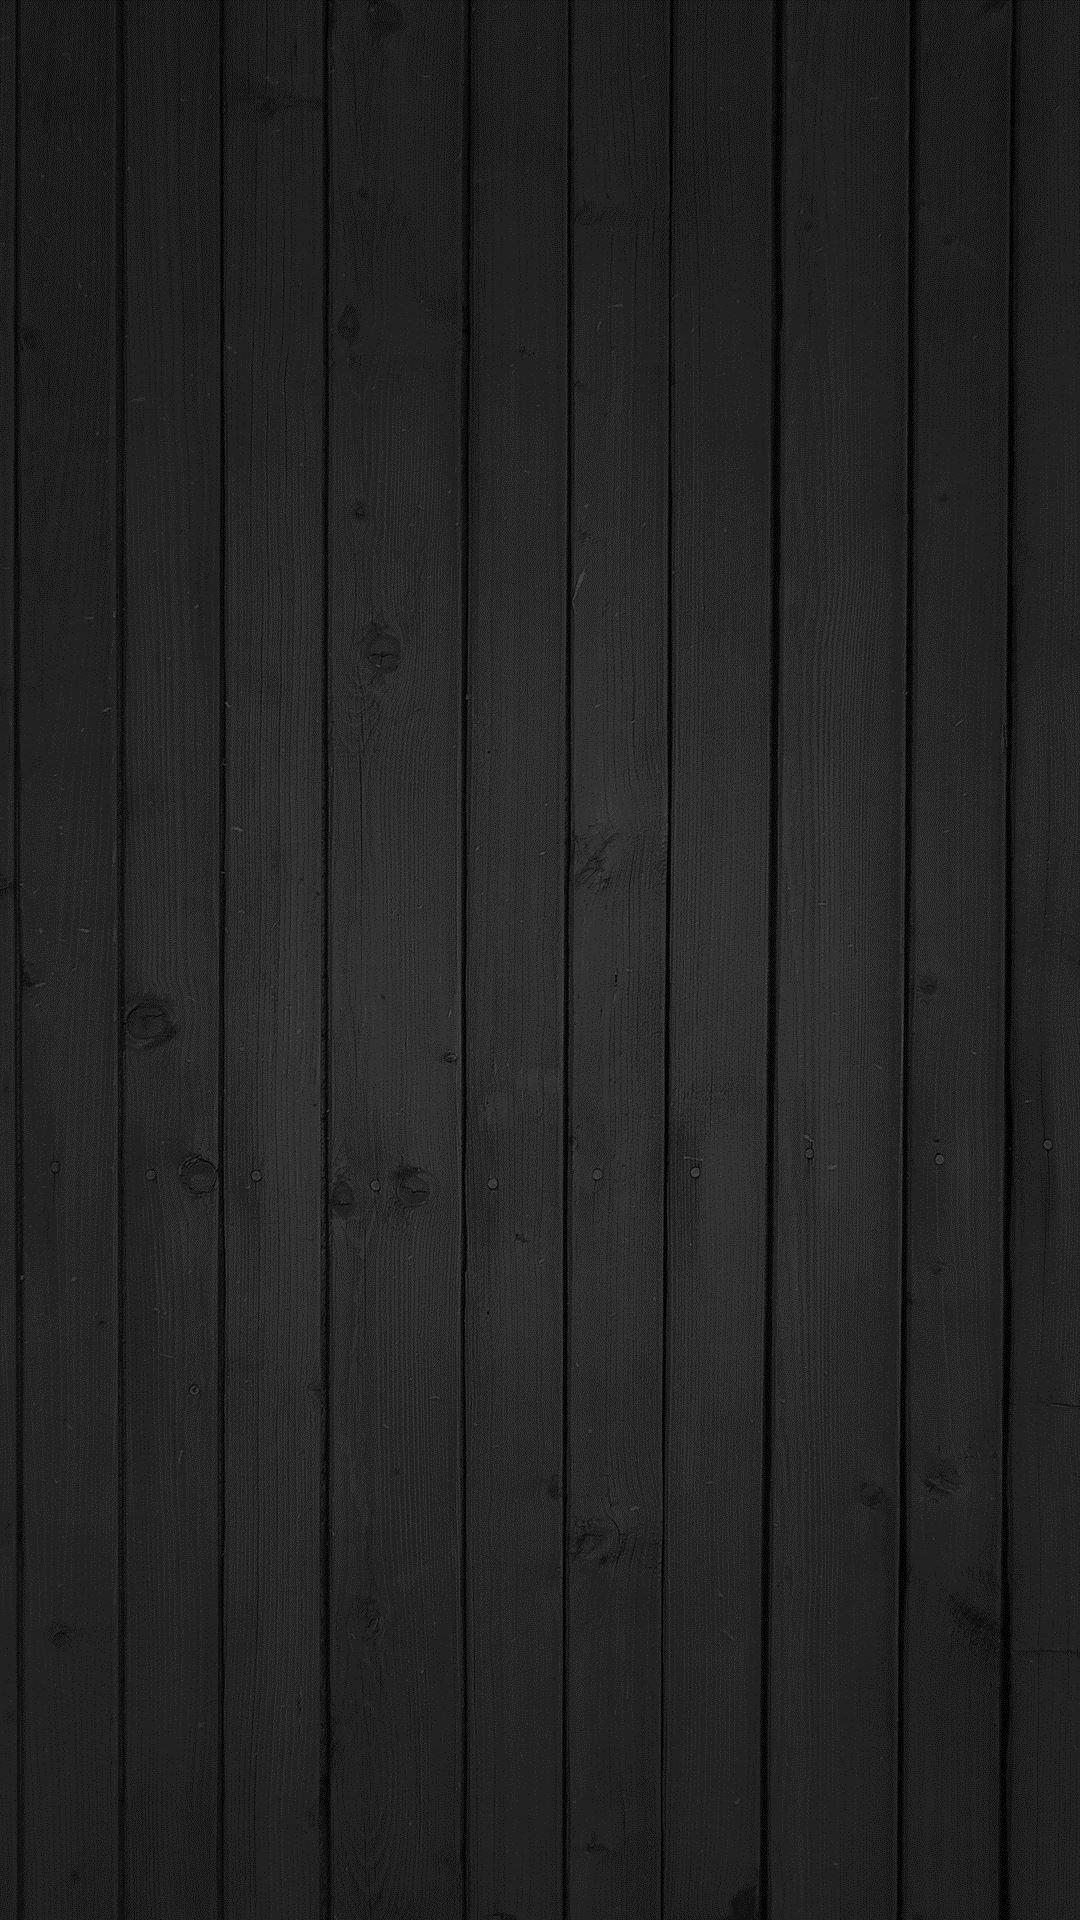 Creative Textures iPhone Wallpaper Free To Download. Wood